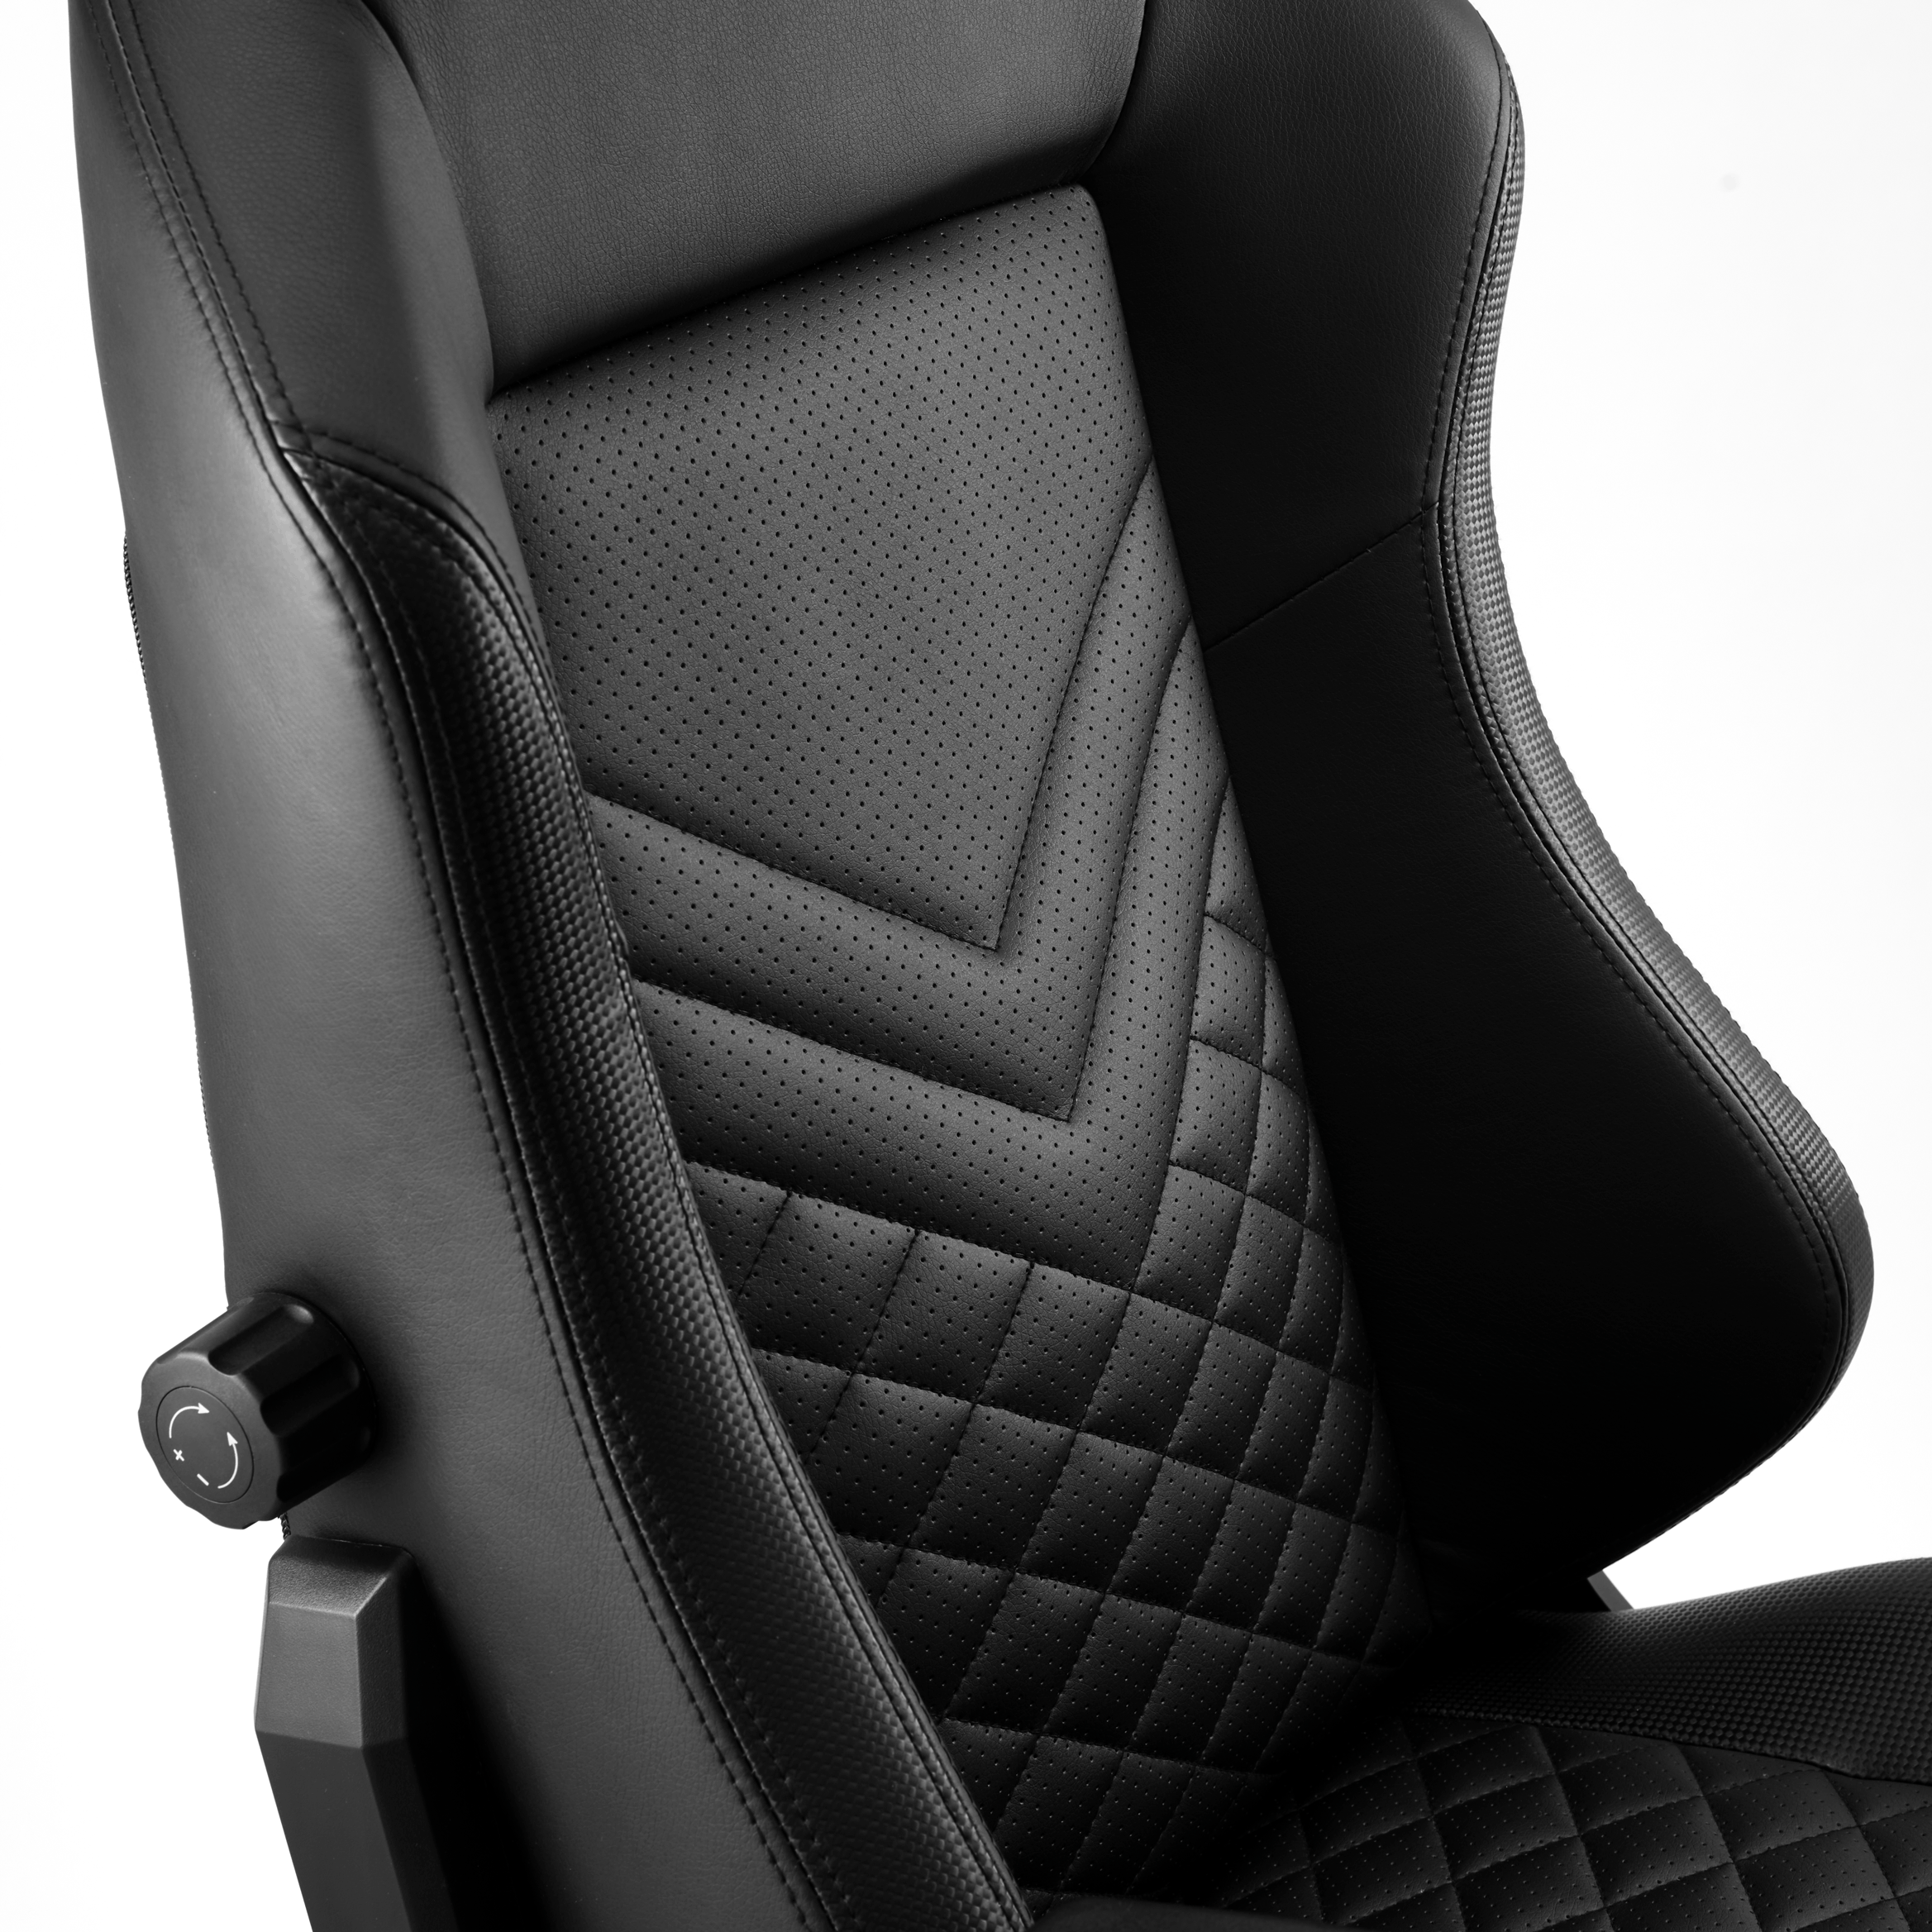 A gaming chair with lumbar support built into the backrest